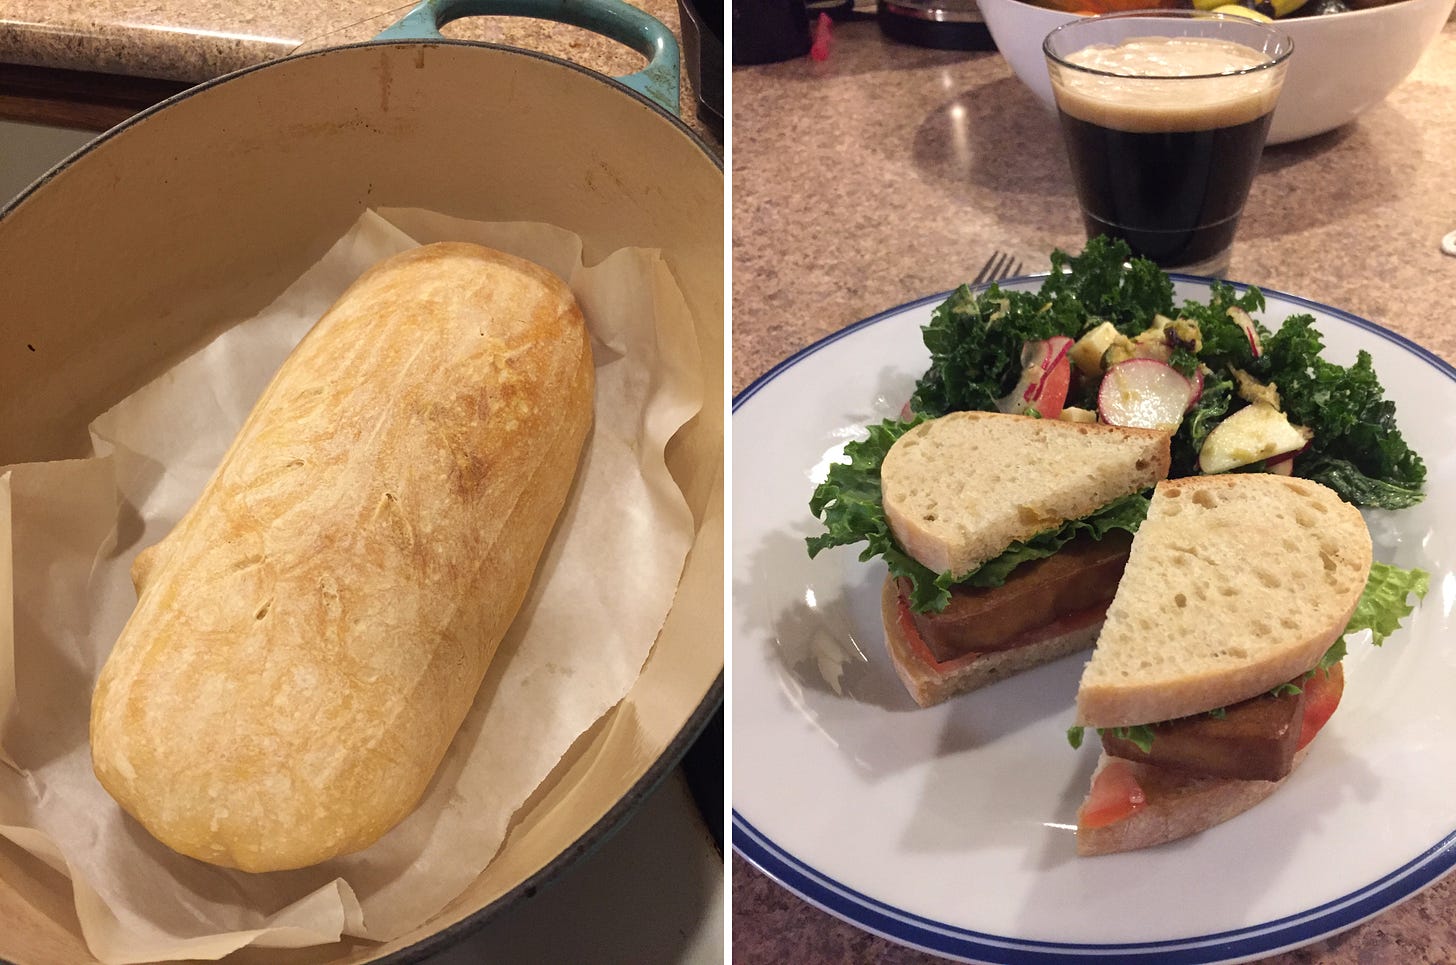 left image: a freshly baked loaf of sourdough inside a dutch oven. Right image: a white plate with a sandwich cut in half in front of the kale salad described above. A foamy glass of stout sits in the background.